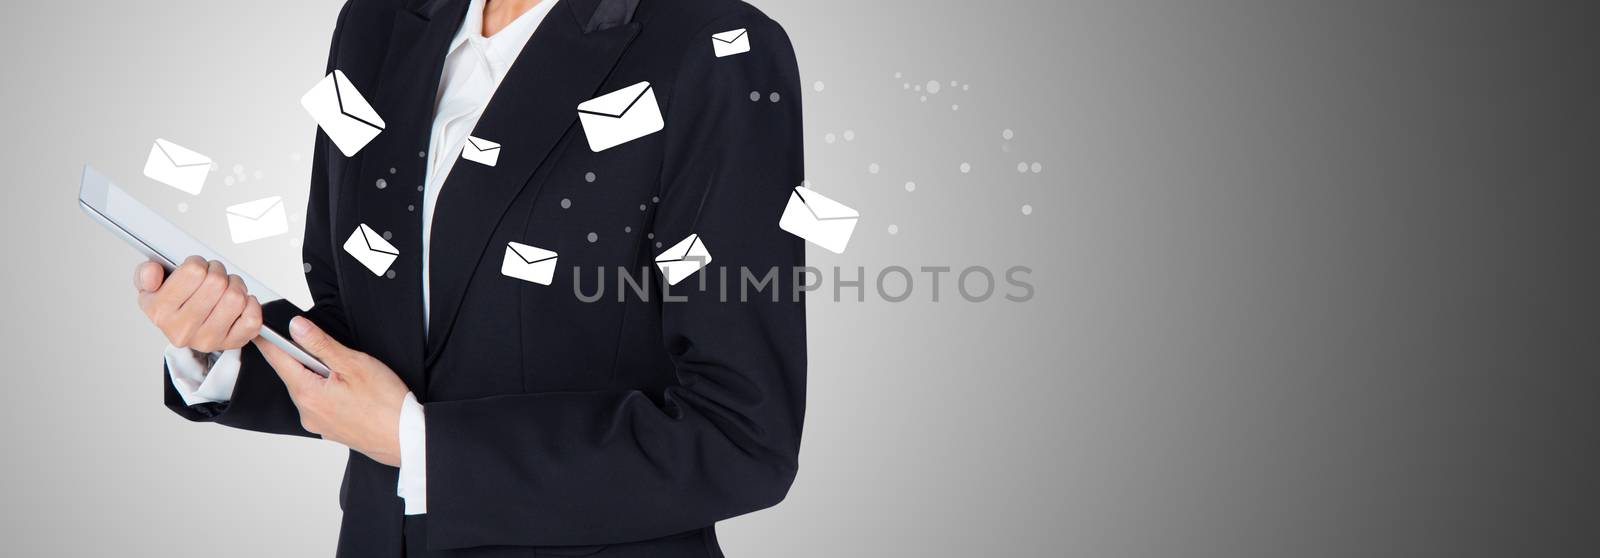 Hand holding woman check and sending message with email in a phone on grey background, banner communication concept.